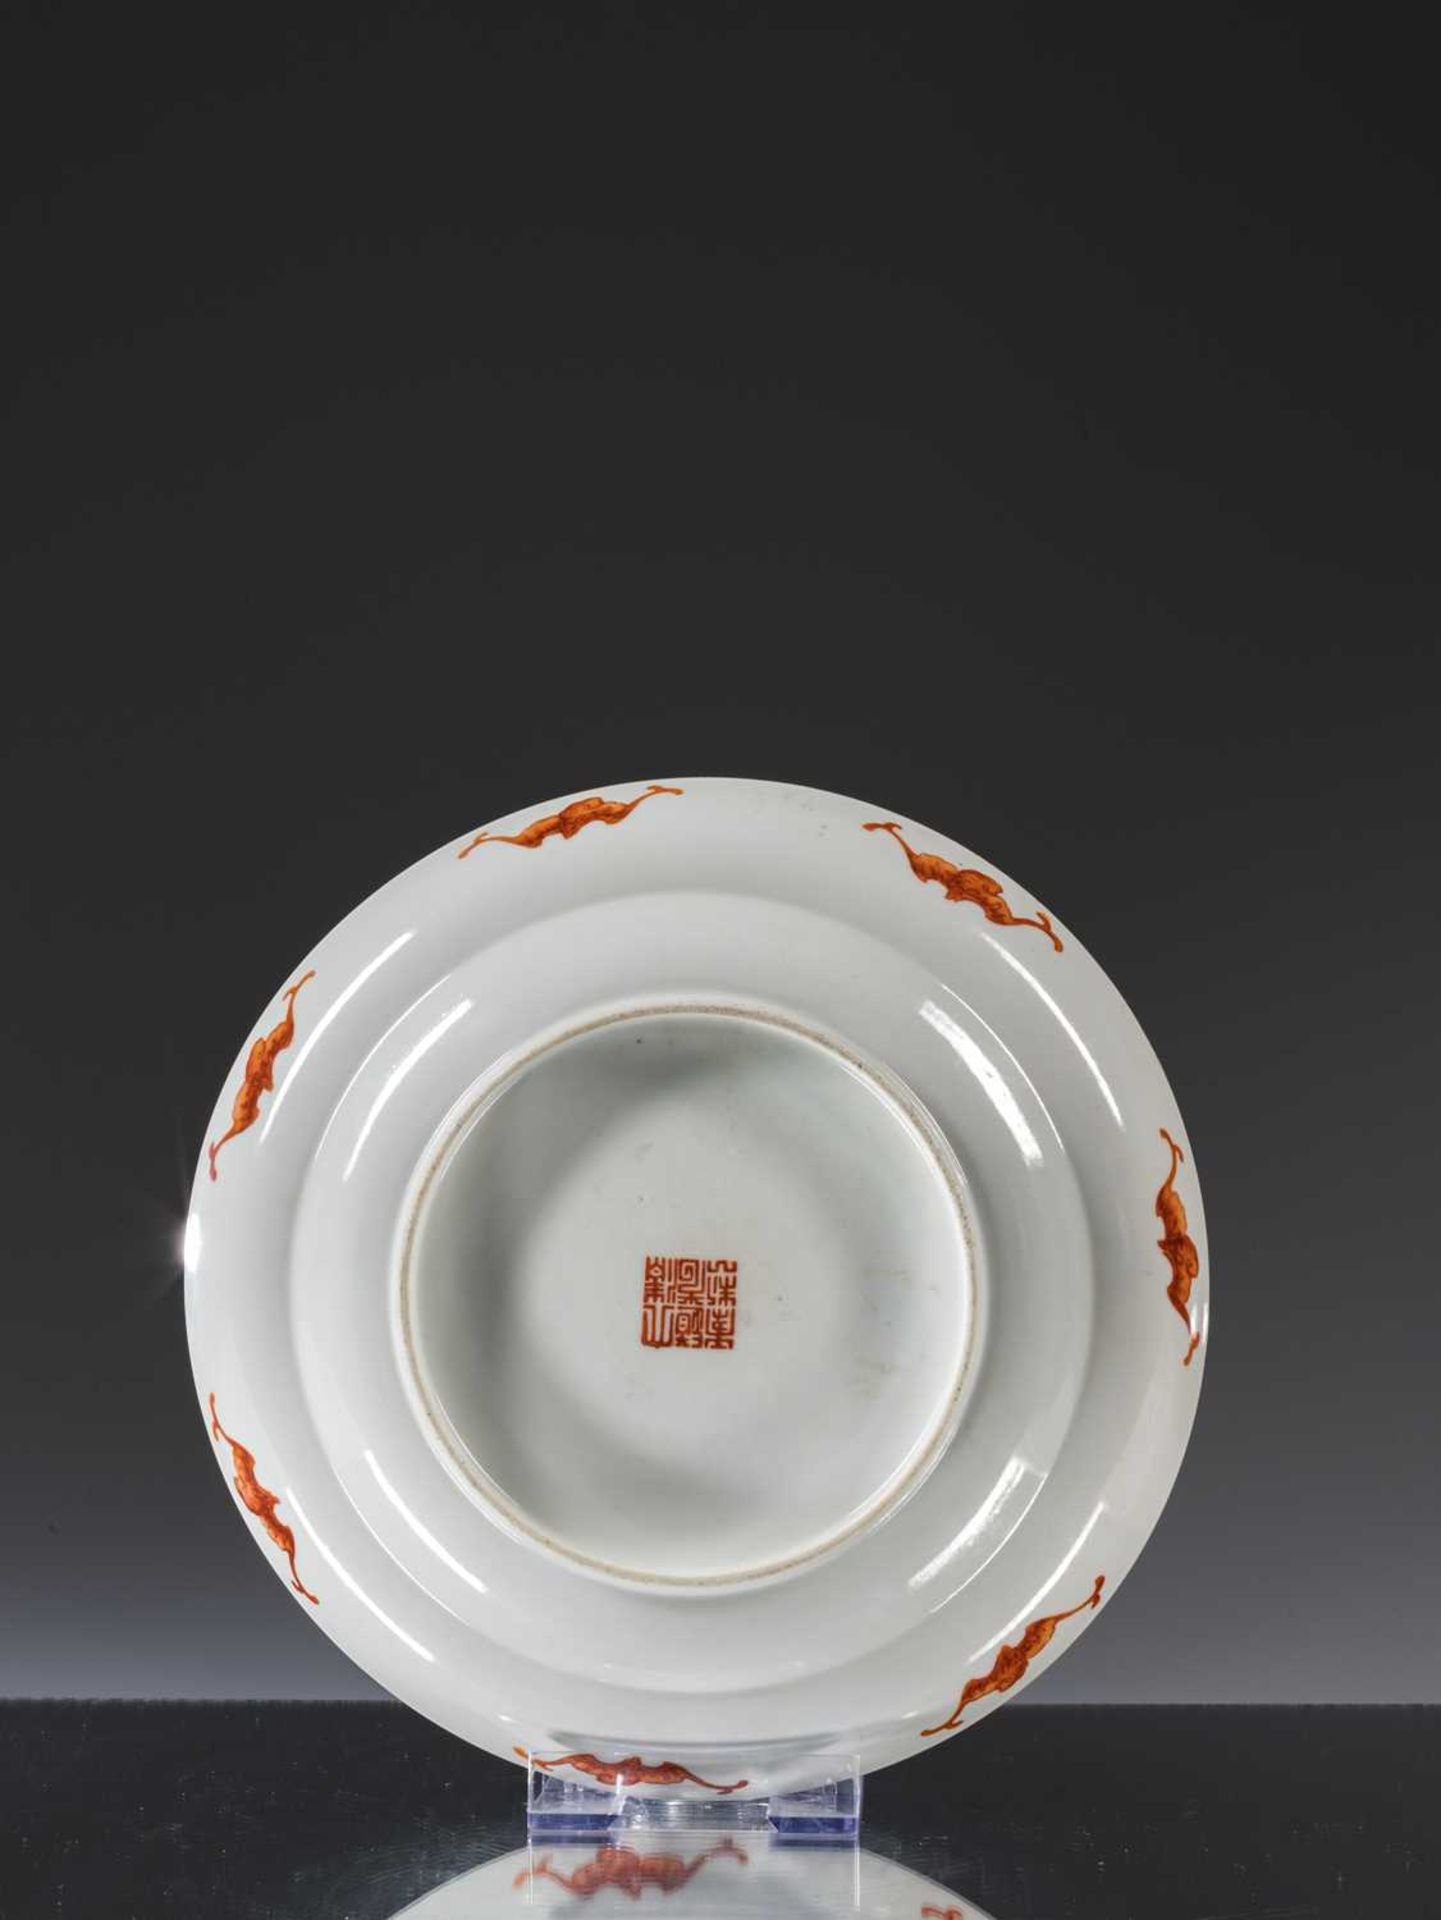 PORCELAIN DISH WITH CRANES - Image 2 of 3